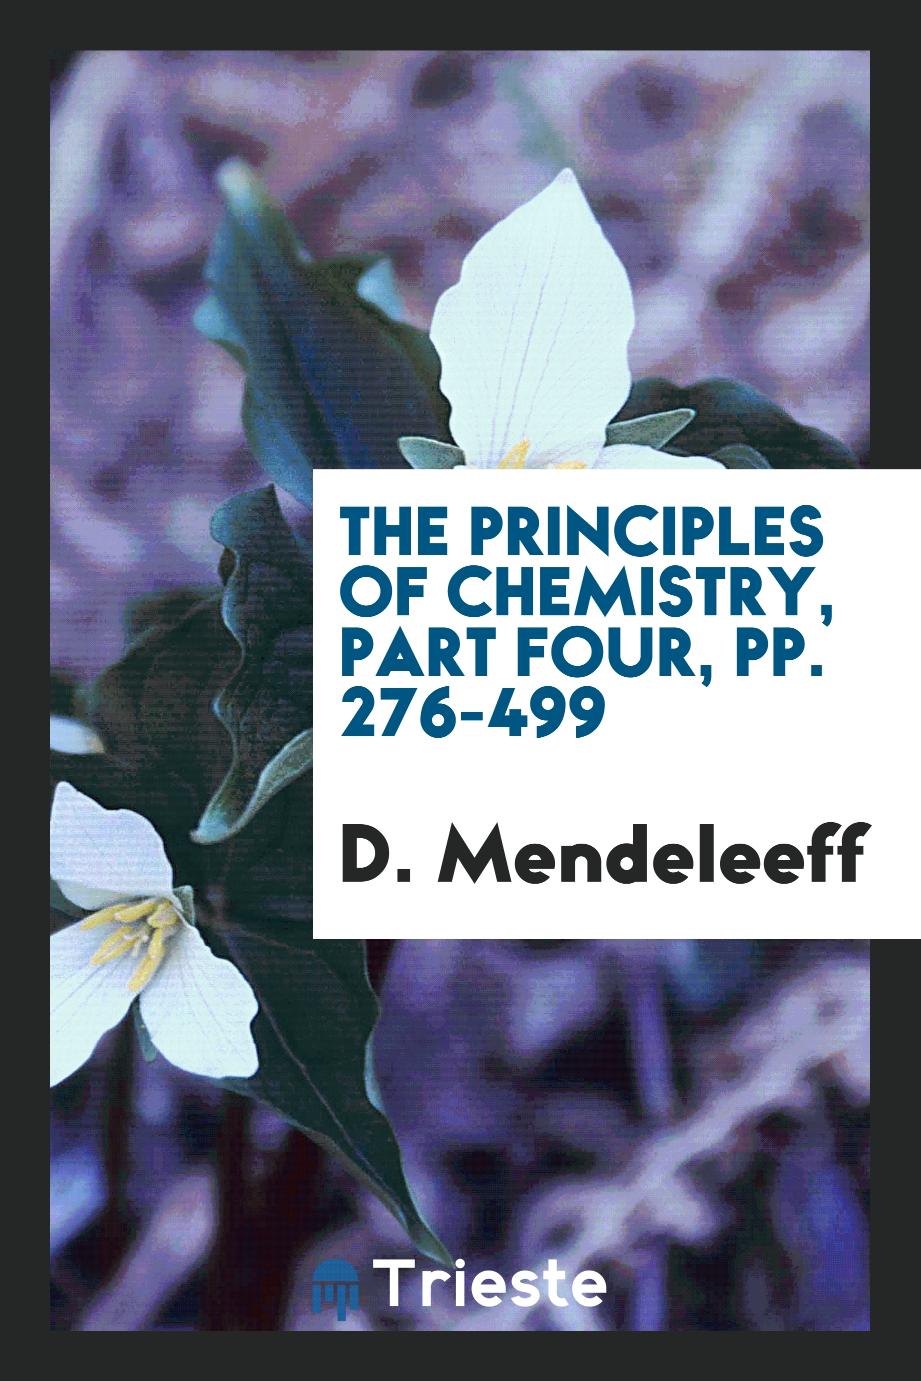 The principles of chemistry, part four, pp. 276-499